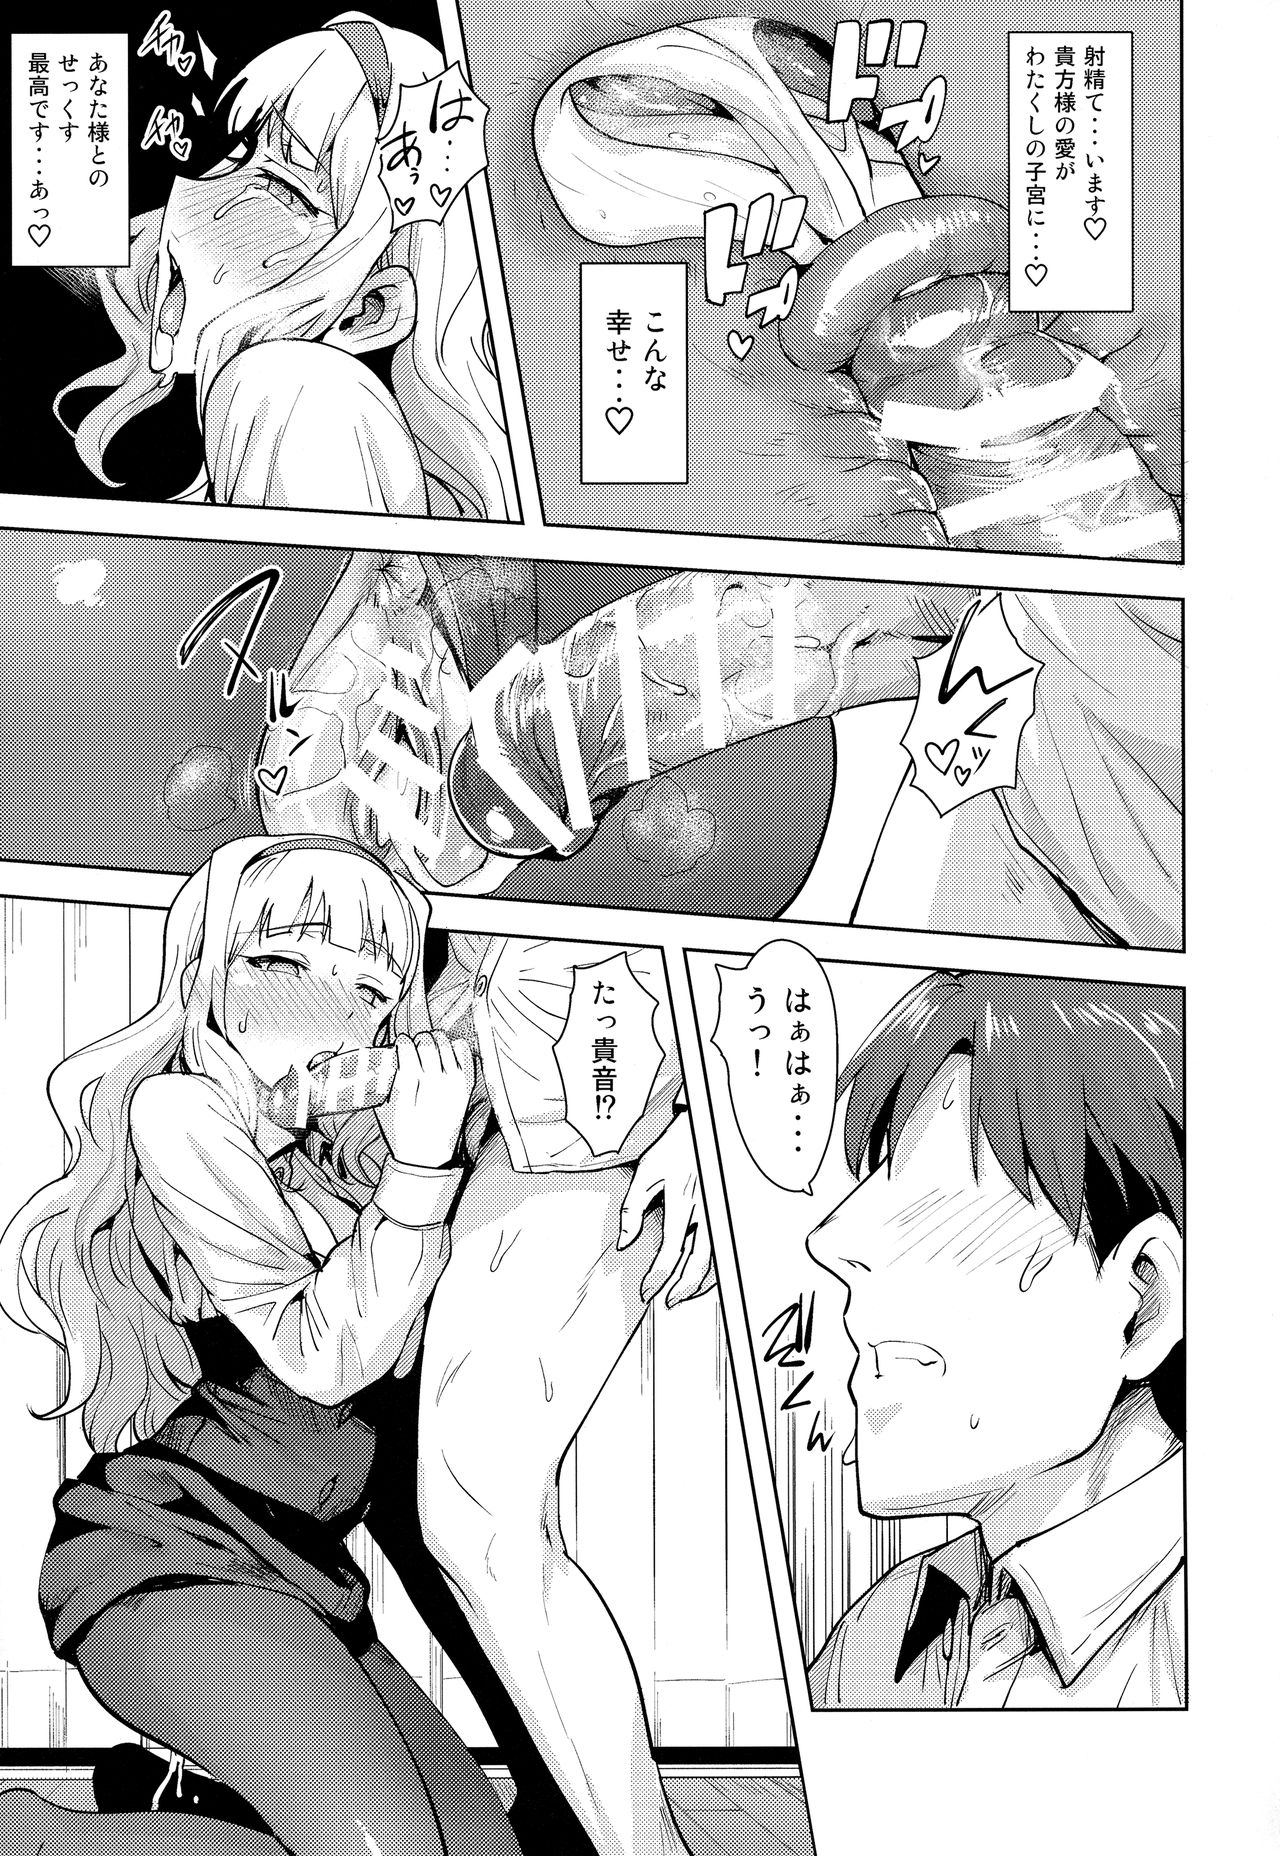 [PLANT (Tsurui)] SWEET MOON 2 (THE IDOLM@STER) page 36 full